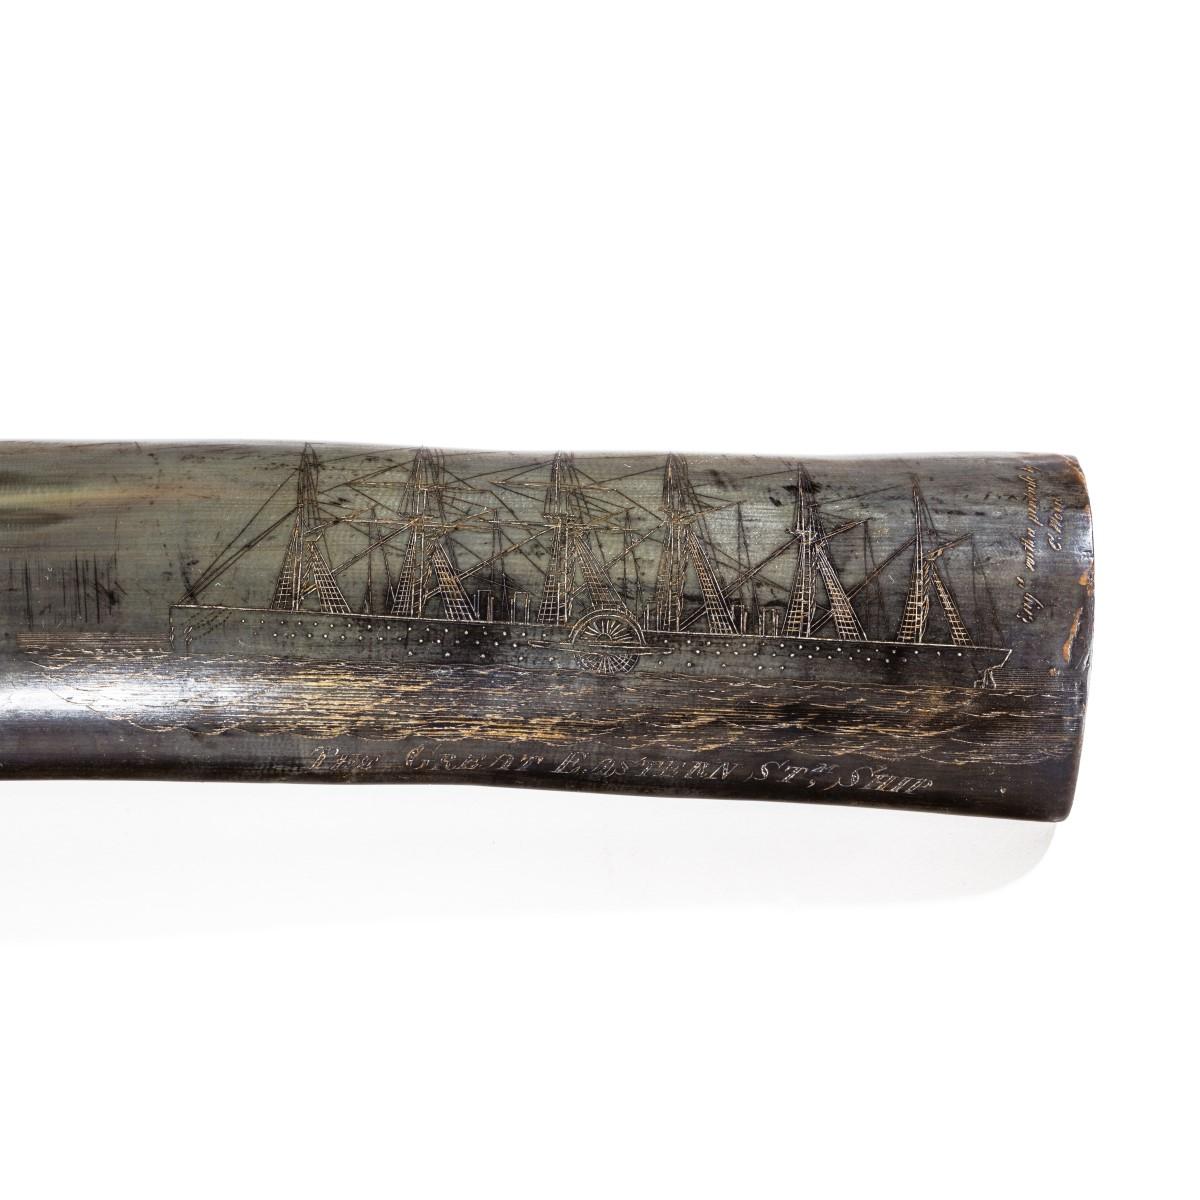 A rare scrimshaw decorated horn, engraved over one side with the Royal Arms countersigned and titled ship profiles for the Great Eastern, the Great Britain, H.M.S. Warrior.